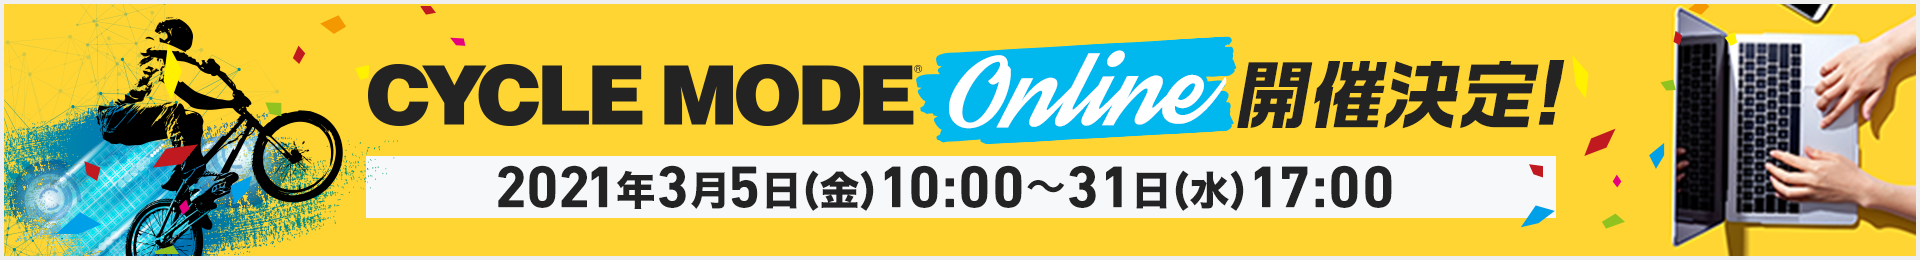 CYCLE MODE ONLINE 開催決定